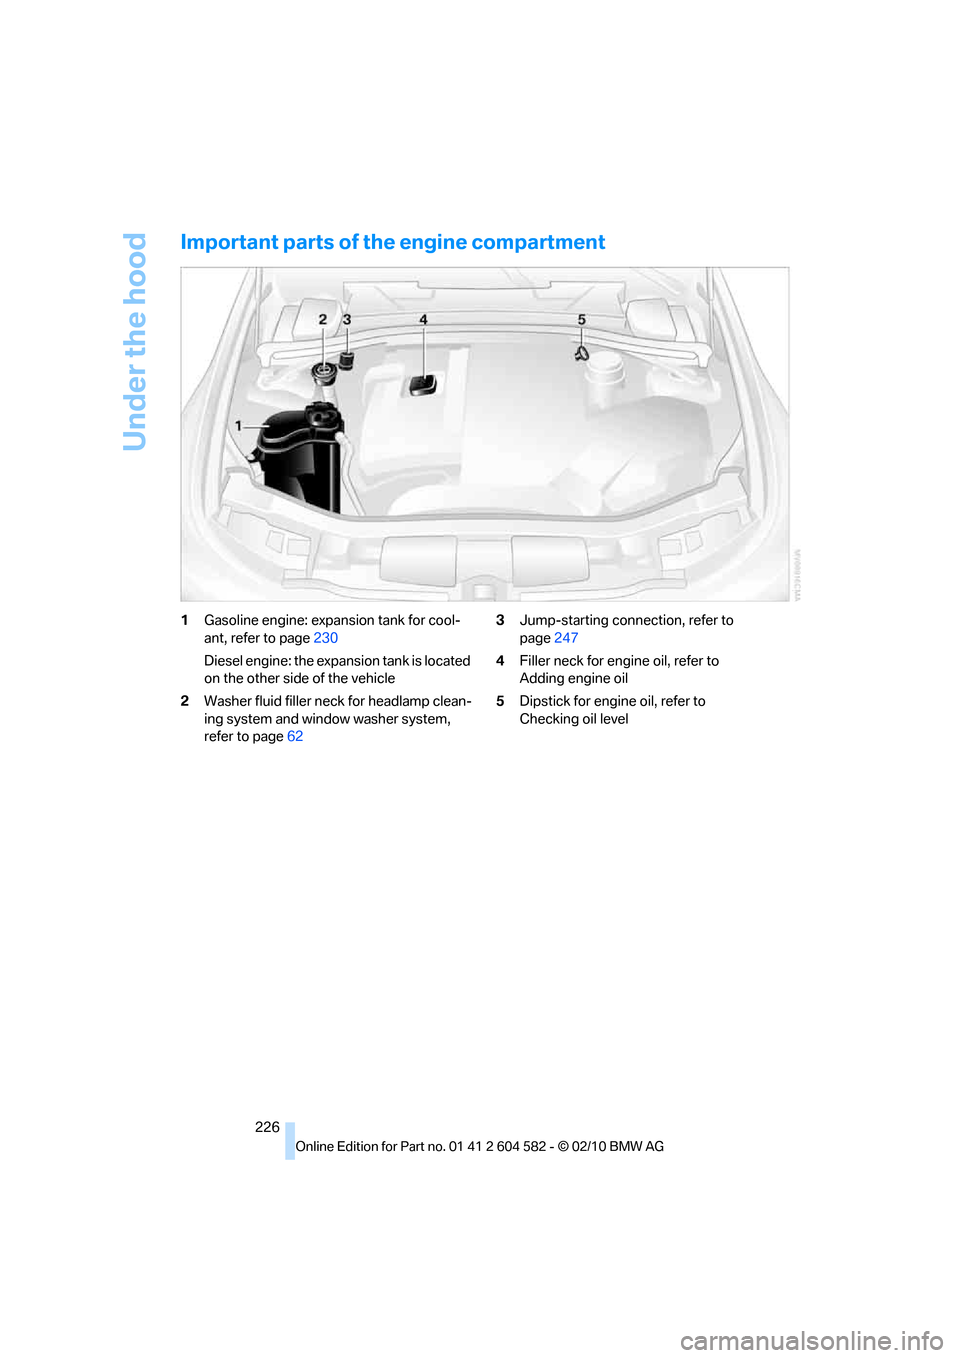 BMW 328I TOURING 2011 E91 Owners Manual Under the hood
226
Important parts of the engine compartment
1Gasoline engine: expansion tank for cool-
ant, refer to page230
Diesel engine: the expansion tank is located 
on the other side of the veh